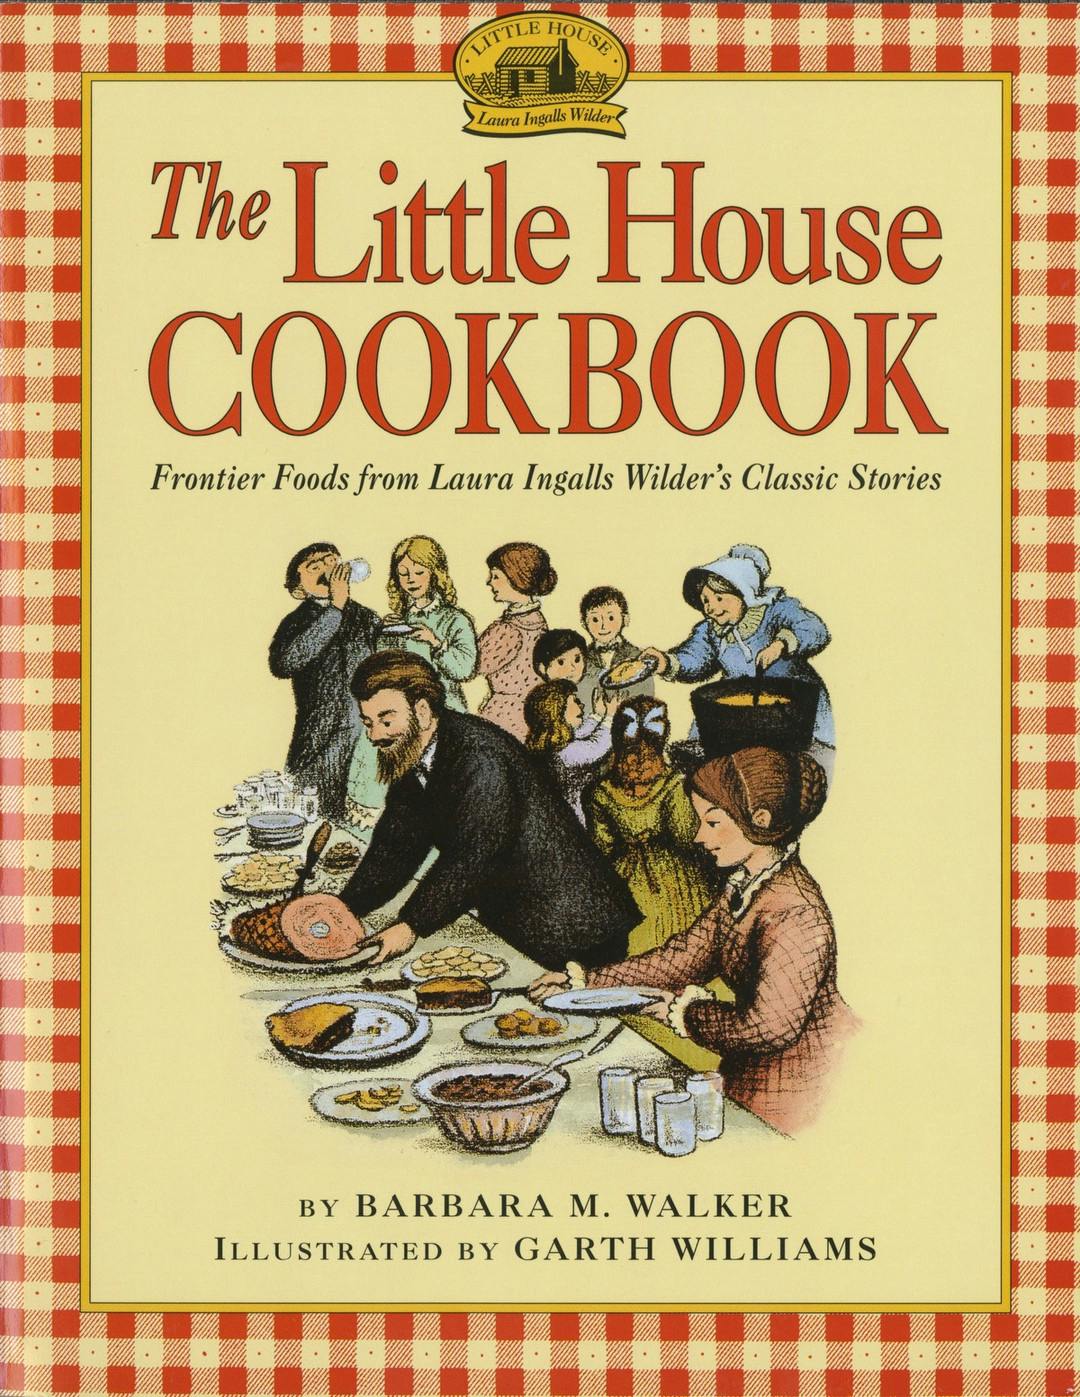 The Little House Cookbook: Frontier Food from Laura Ingalls Wilder's Classic Stories